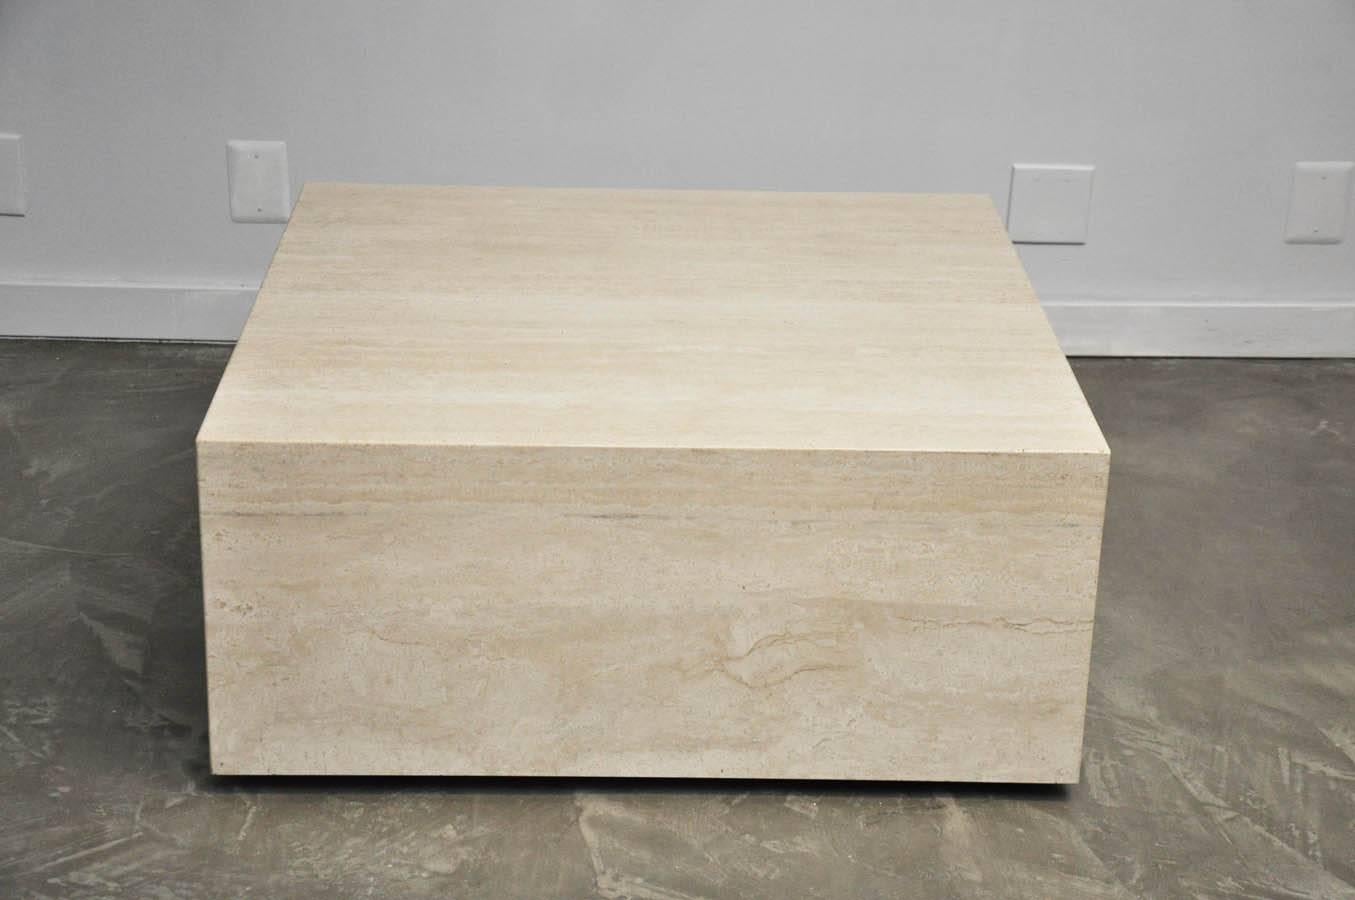 Travertine coffee table on castors for mobility.